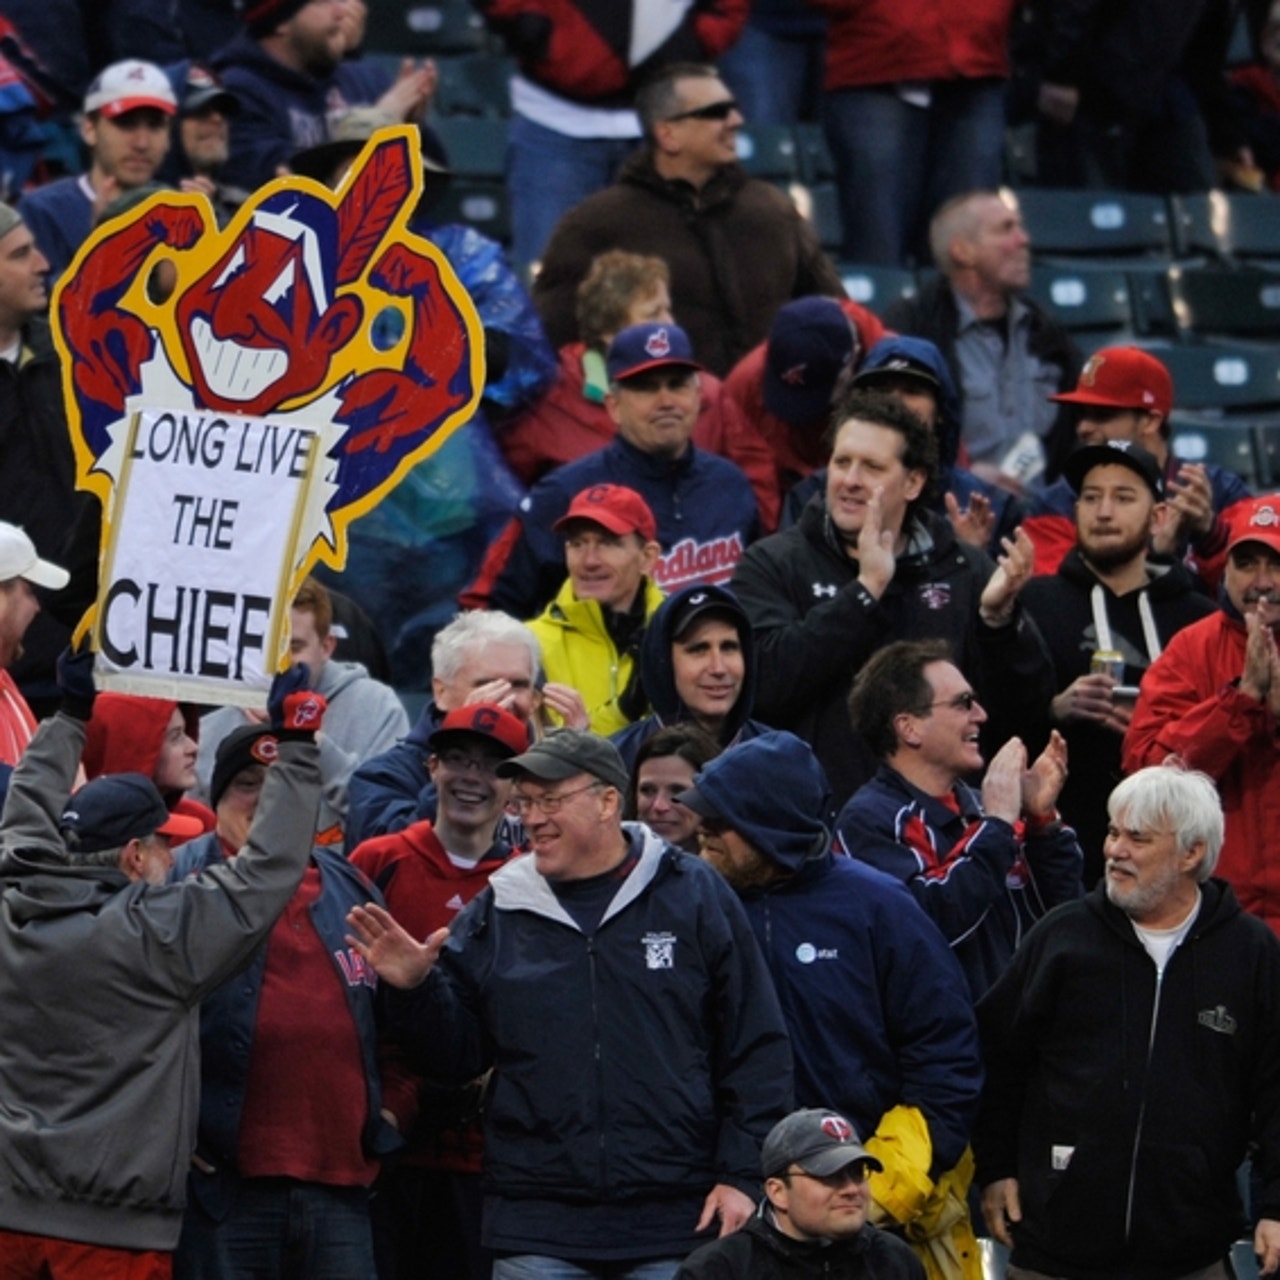 5 logos the Cleveland Indians could use instead of Chief Wahoo